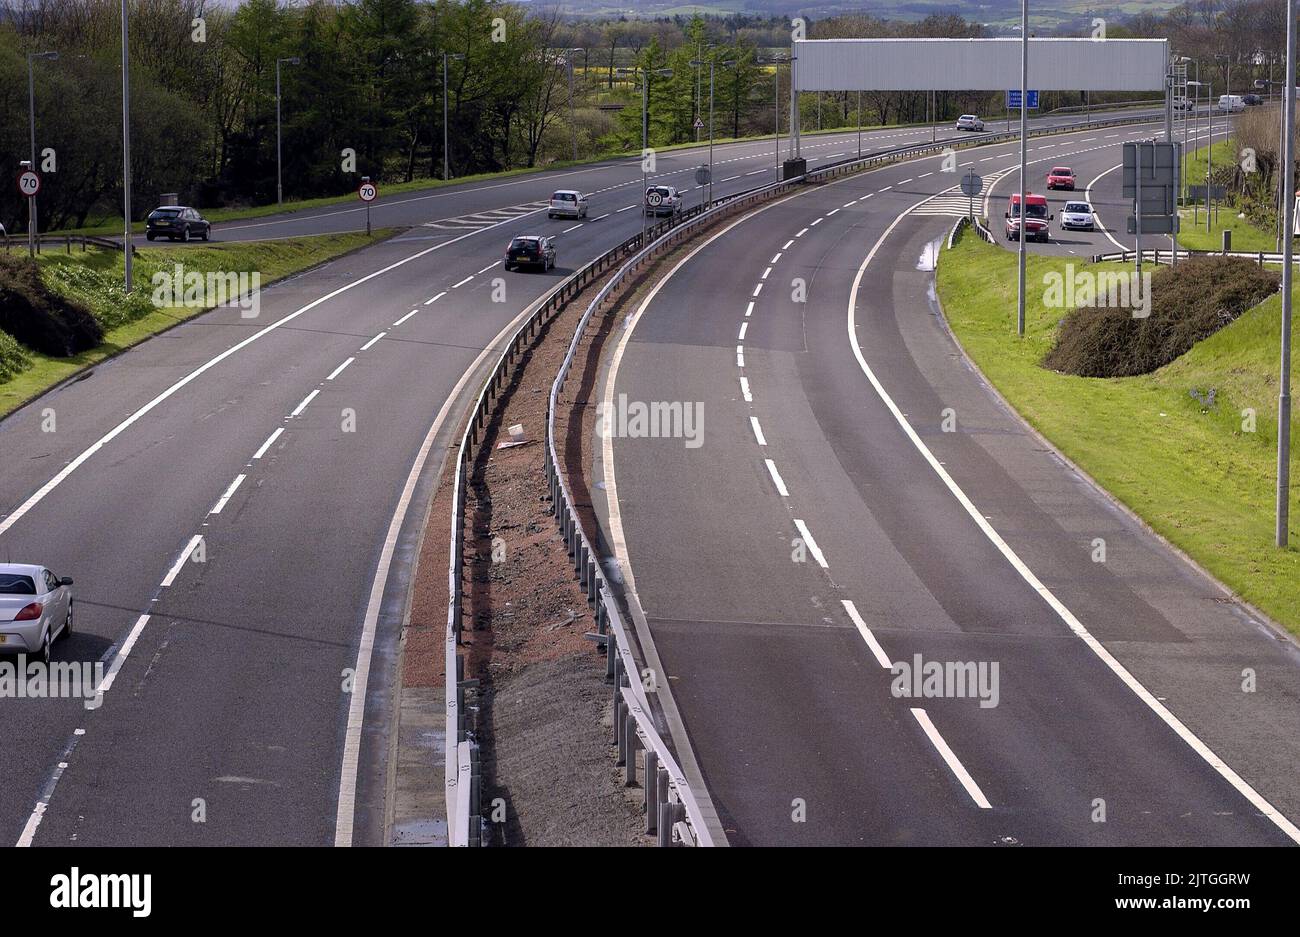 AJAXNETPHOTO. MAY, 2008. GLASGOW, SCOTLAND. - DUAL CARRIAGEWAY - M8 MOTORWAY HEADING WEST TO ERSKINE AND GREENOCK (LEFT) AND INTO CITY (RIGHT) SEEN FROM FLYOVER.PHOTO:JONATHAN EASTLAND/AJAX REF:D80105 735 Stock Photo